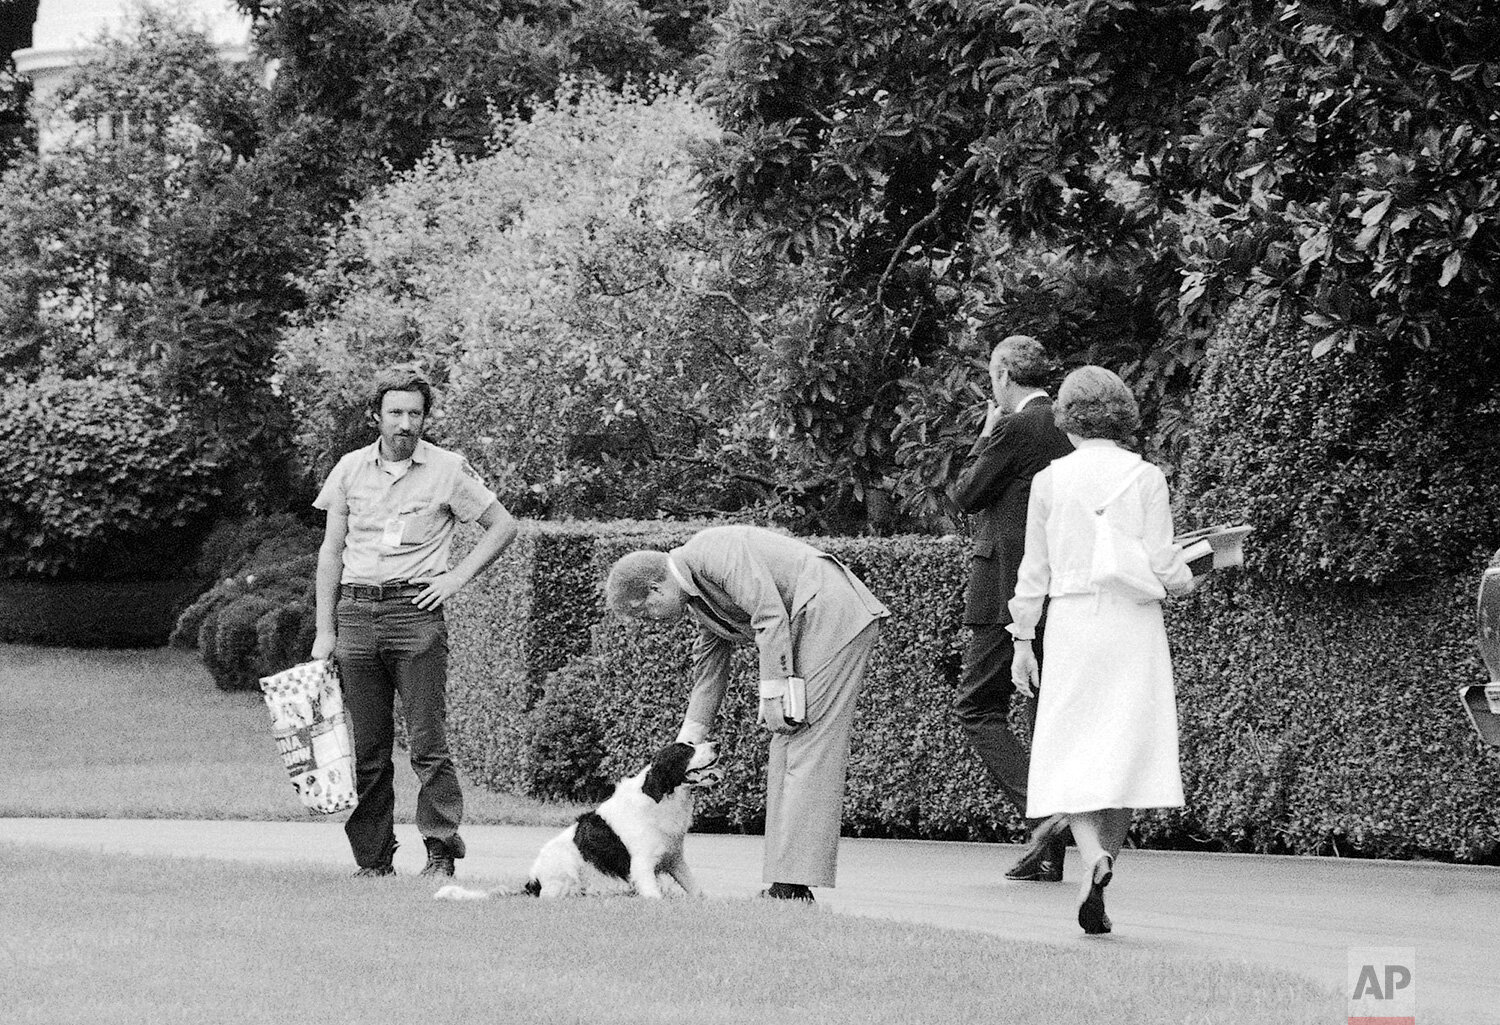  President Jimmy Carter and Rosalynn Carter play with their dog Grits on the south lawn of the White House in Washington D.C. after returning from church on Sunday, Aug. 6, 1978. (AP Photo) 